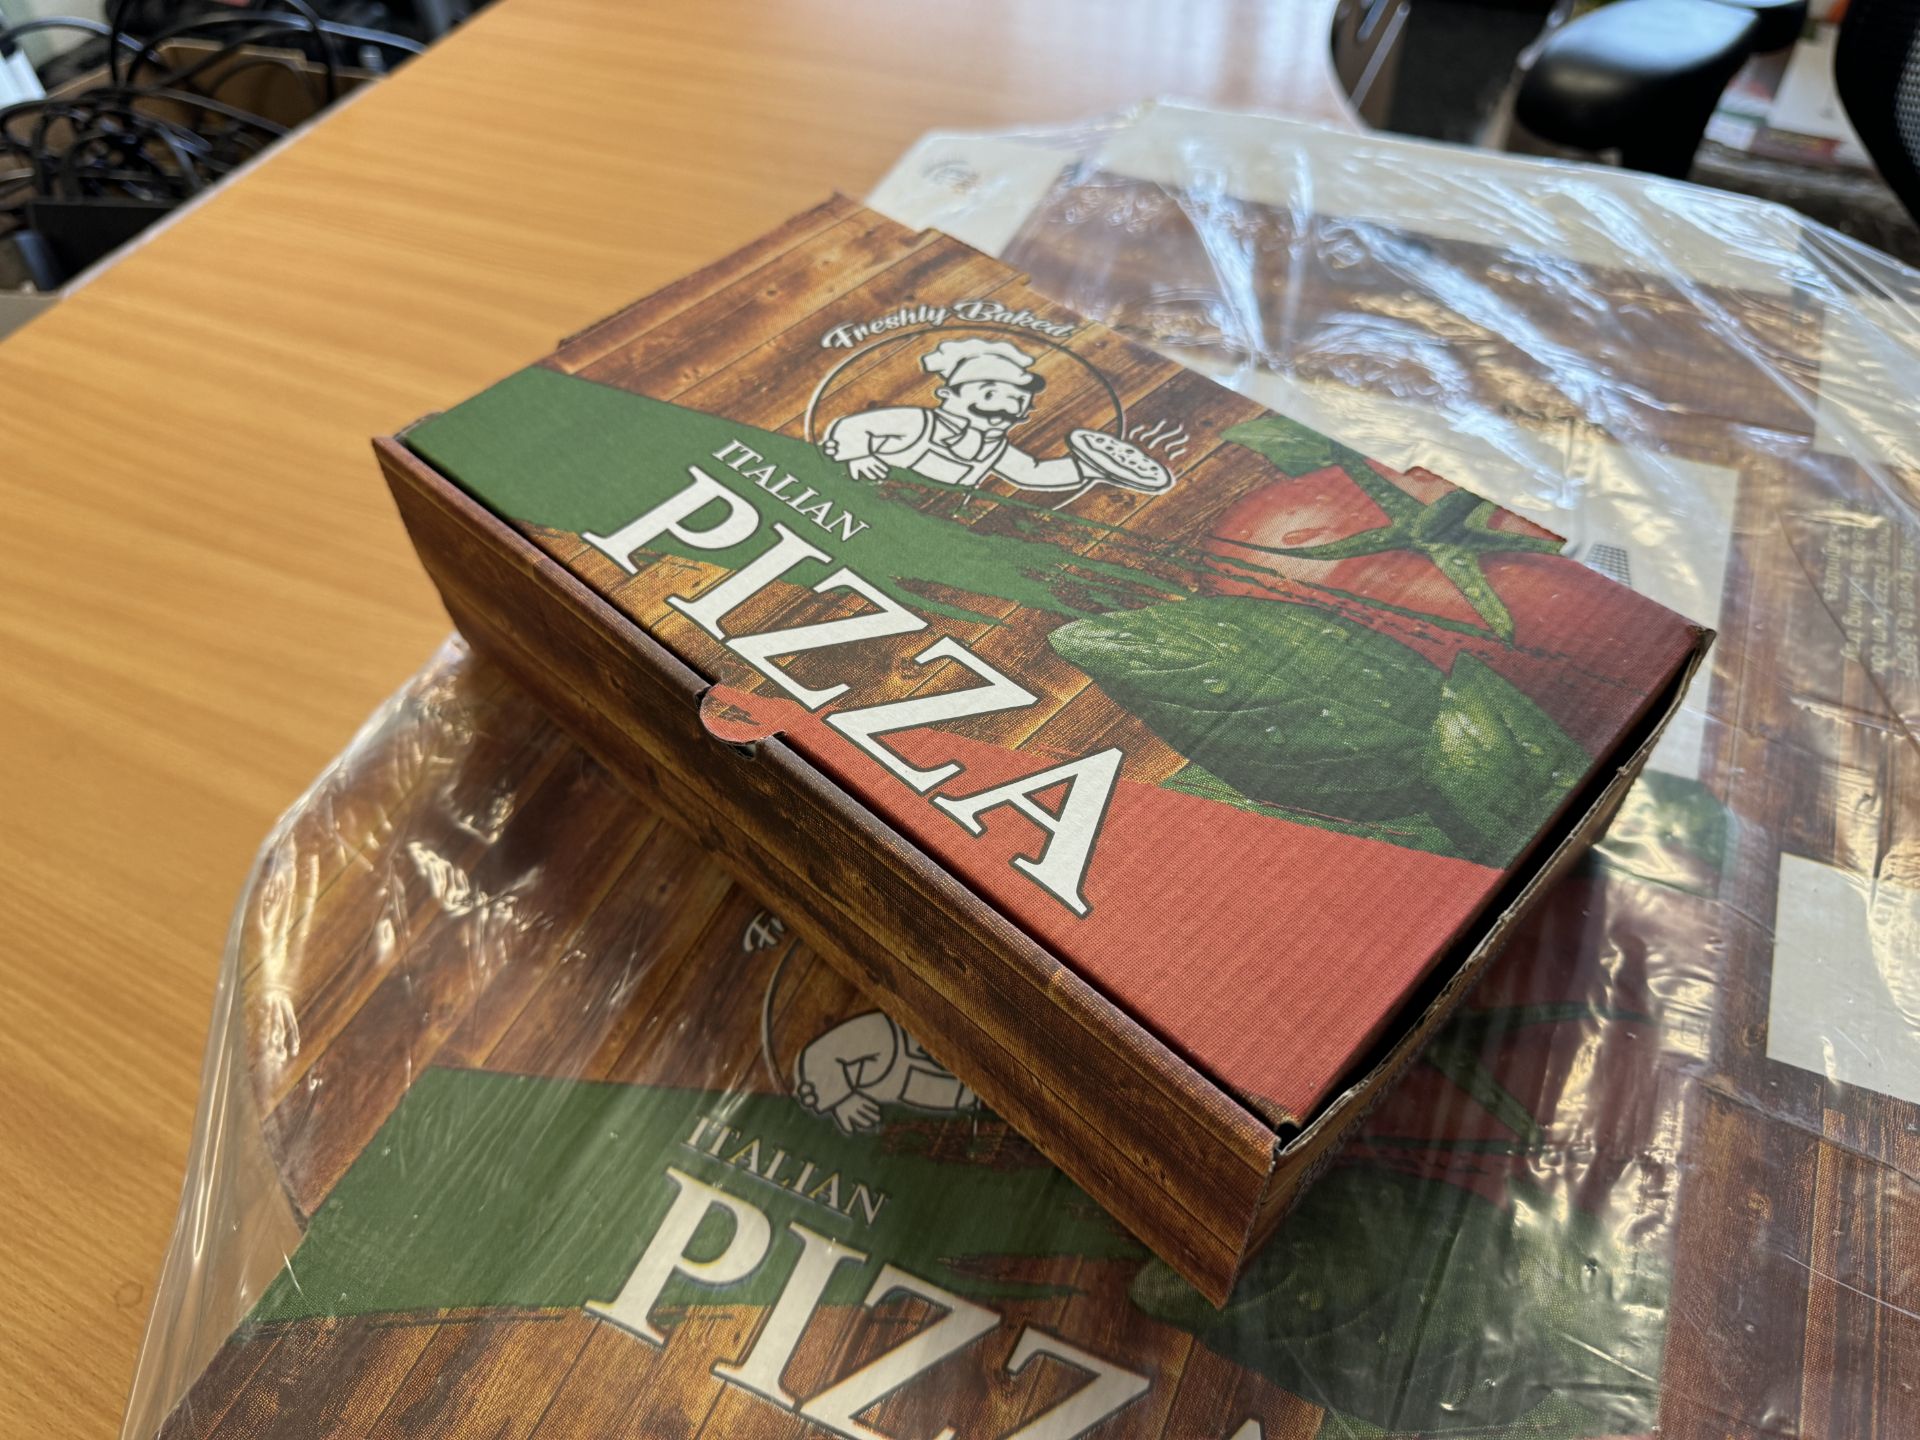 Circa 900 - Italian Pizza Calzone Boxes (Cardboard) - Multiple Uses RRP £130 - Image 3 of 12